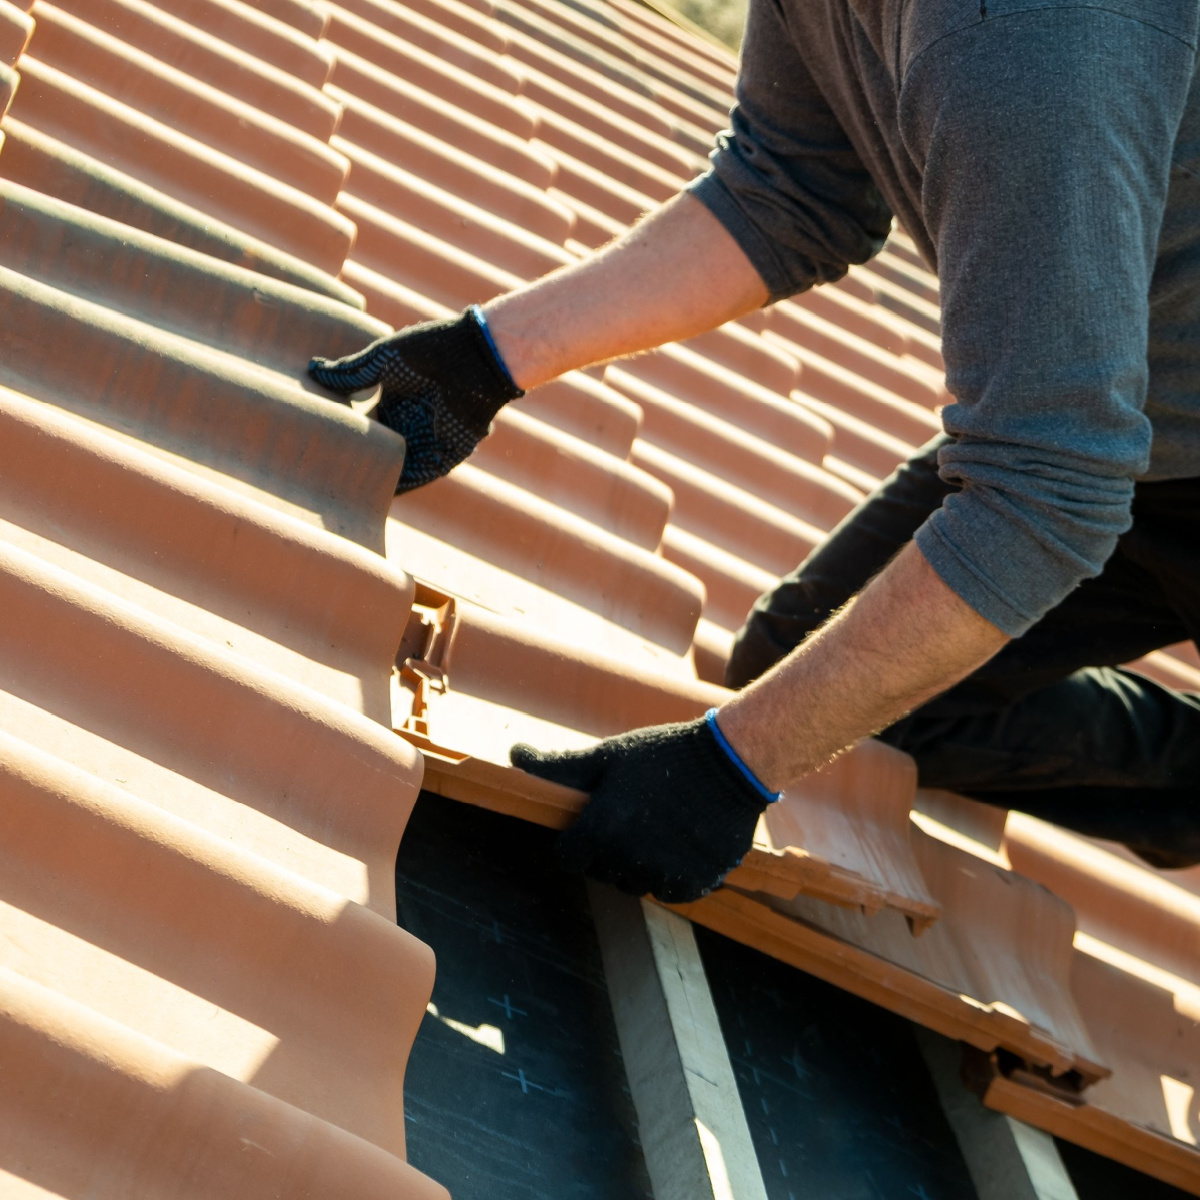 A roofer replacing shingles